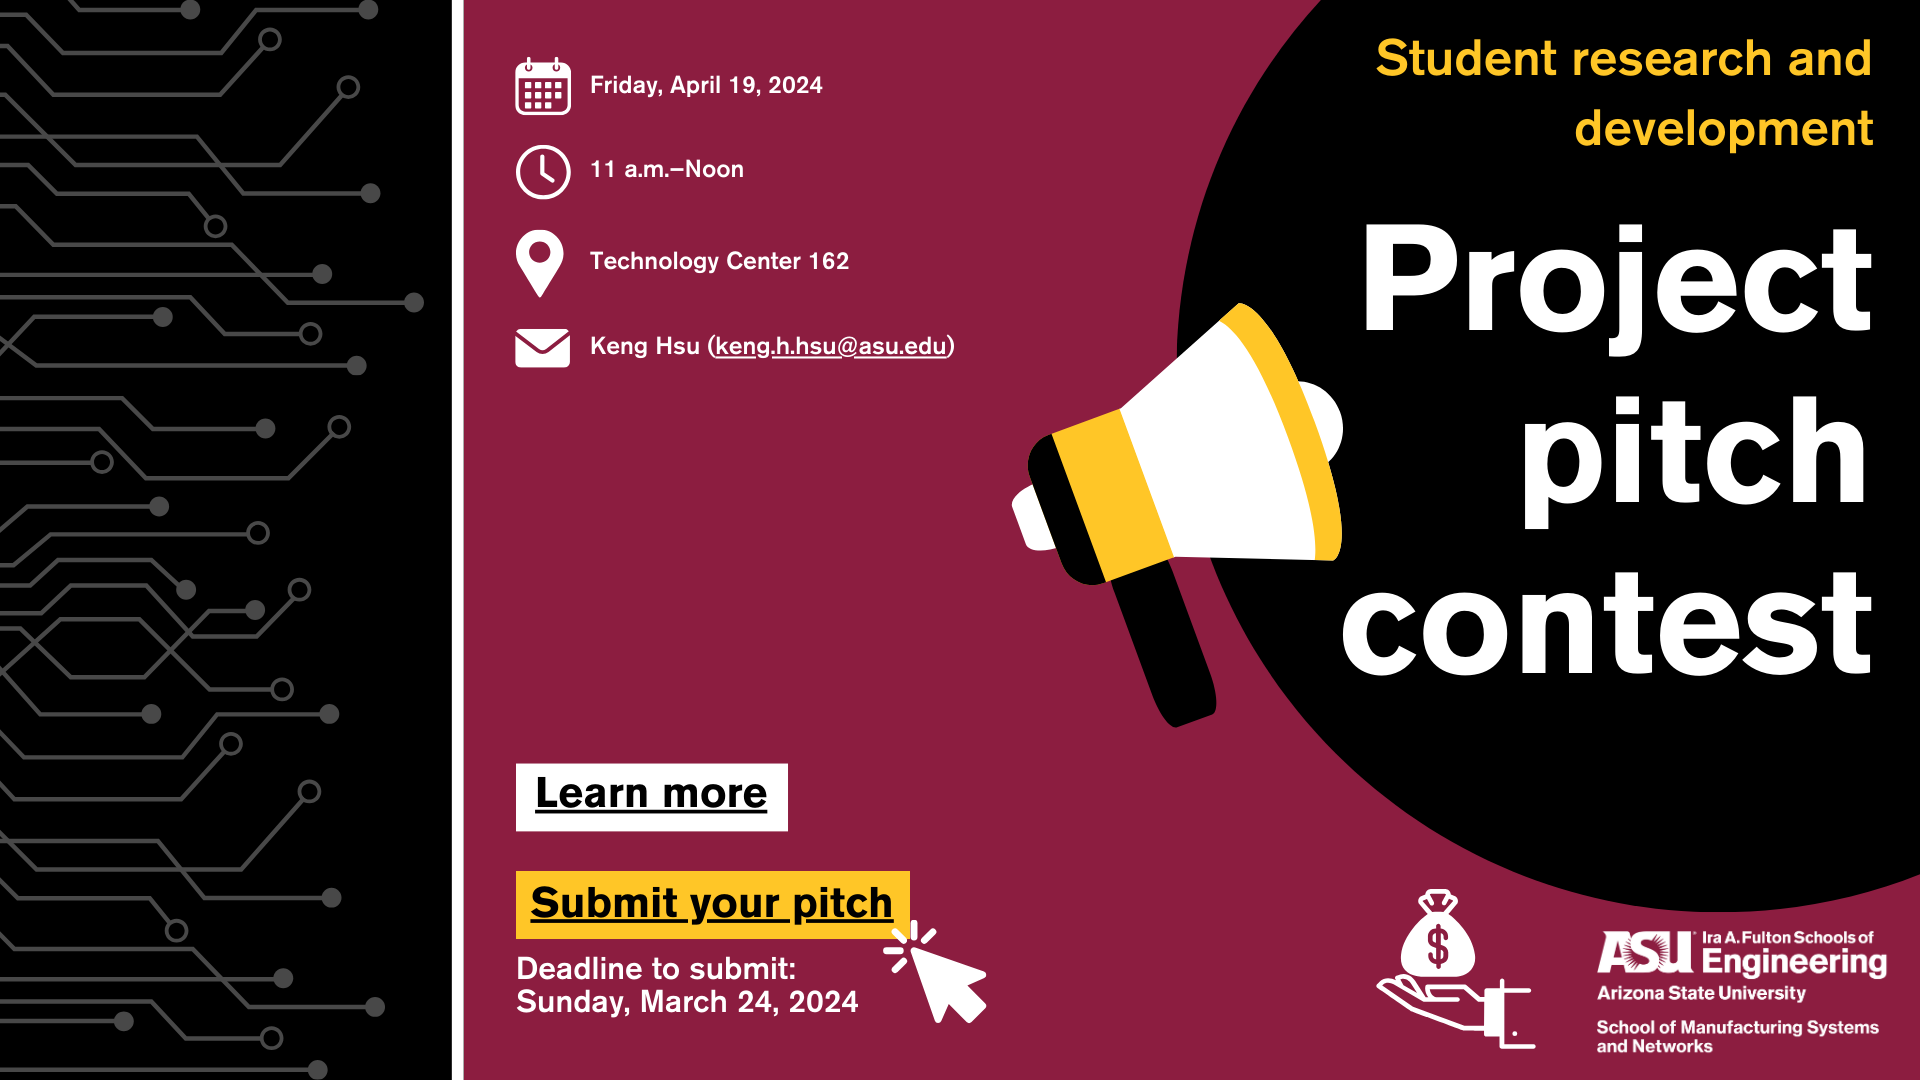 A graphic showing information on the project pitch contest.